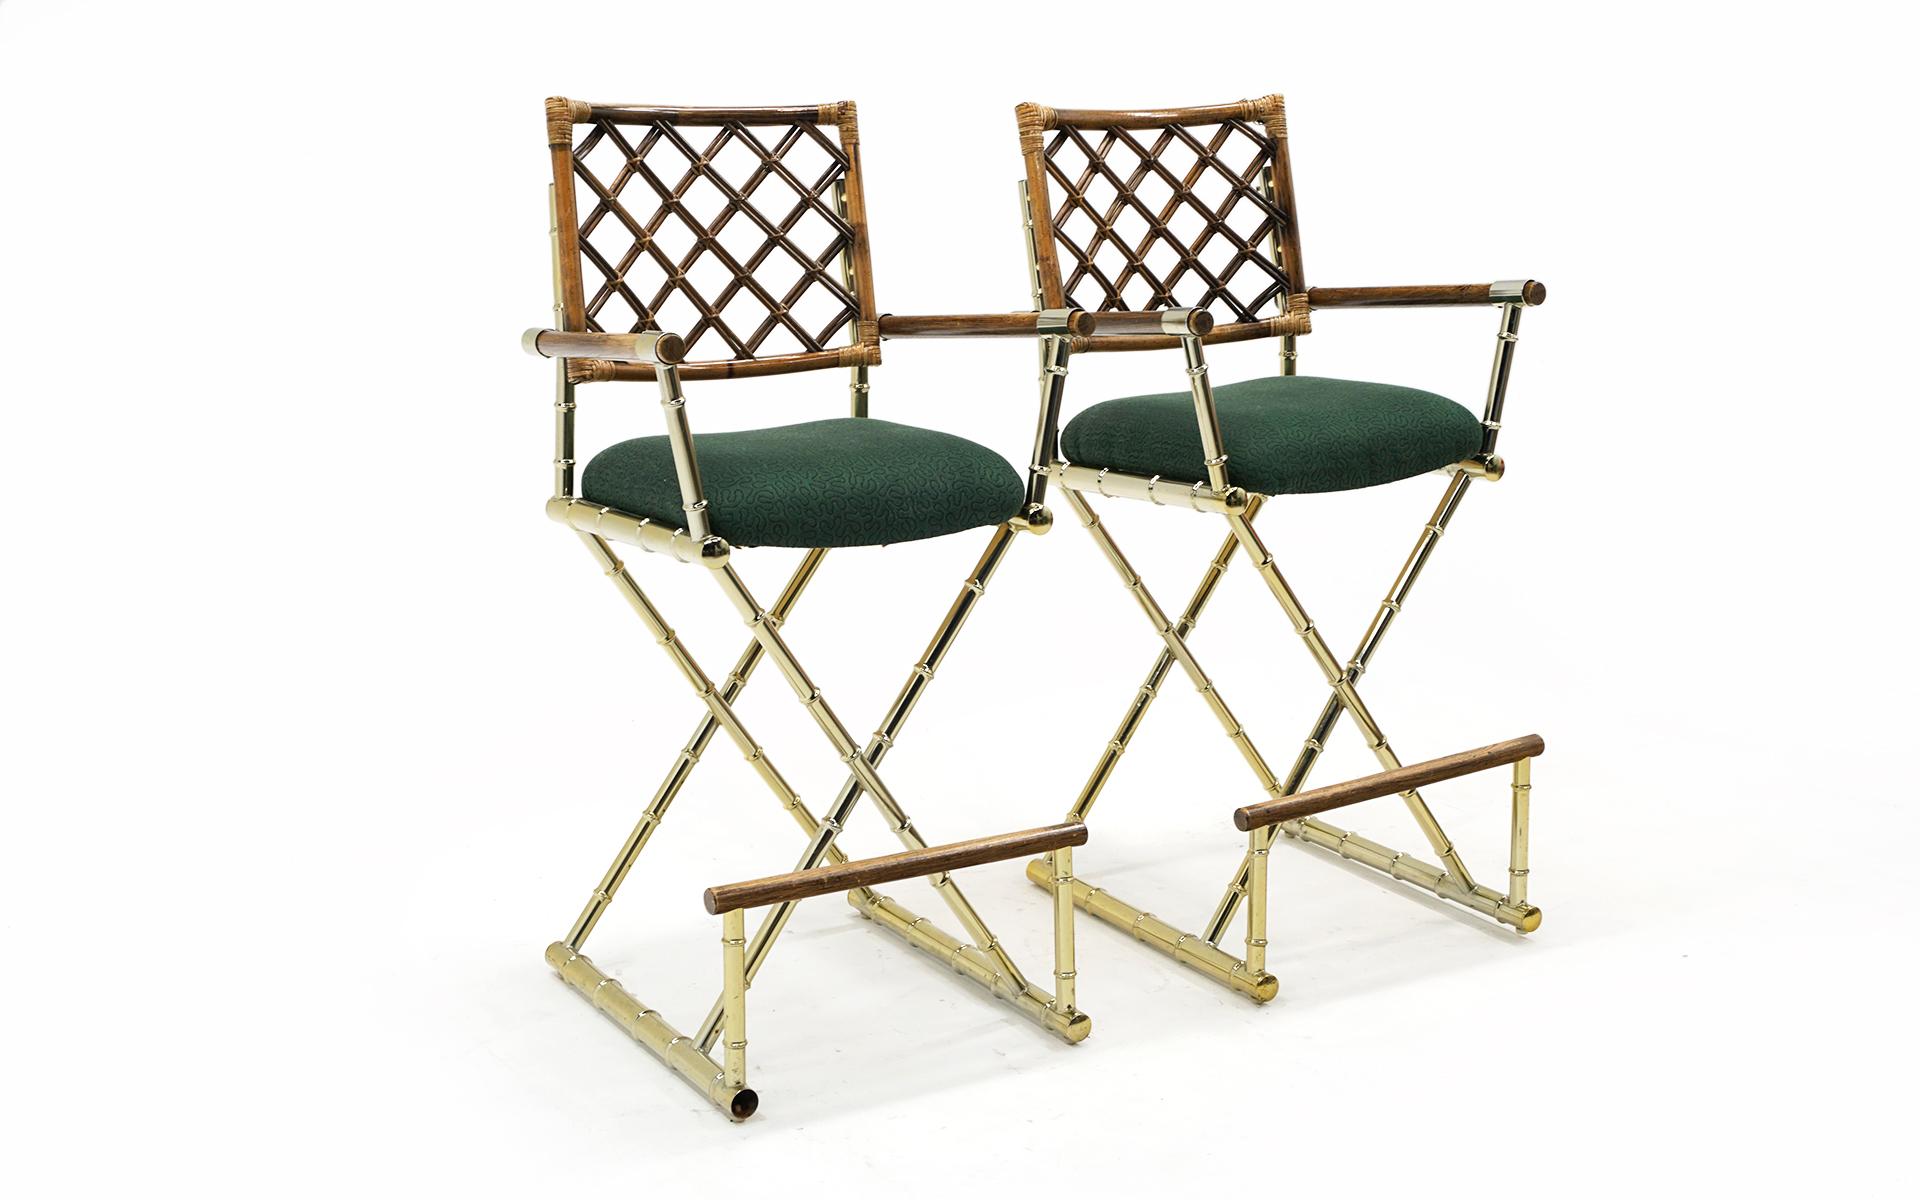 Hollywood Regency Pair of Campaign Style Bar Stools w/ Backs & Arms in Brass, Bamboo, and Rattan